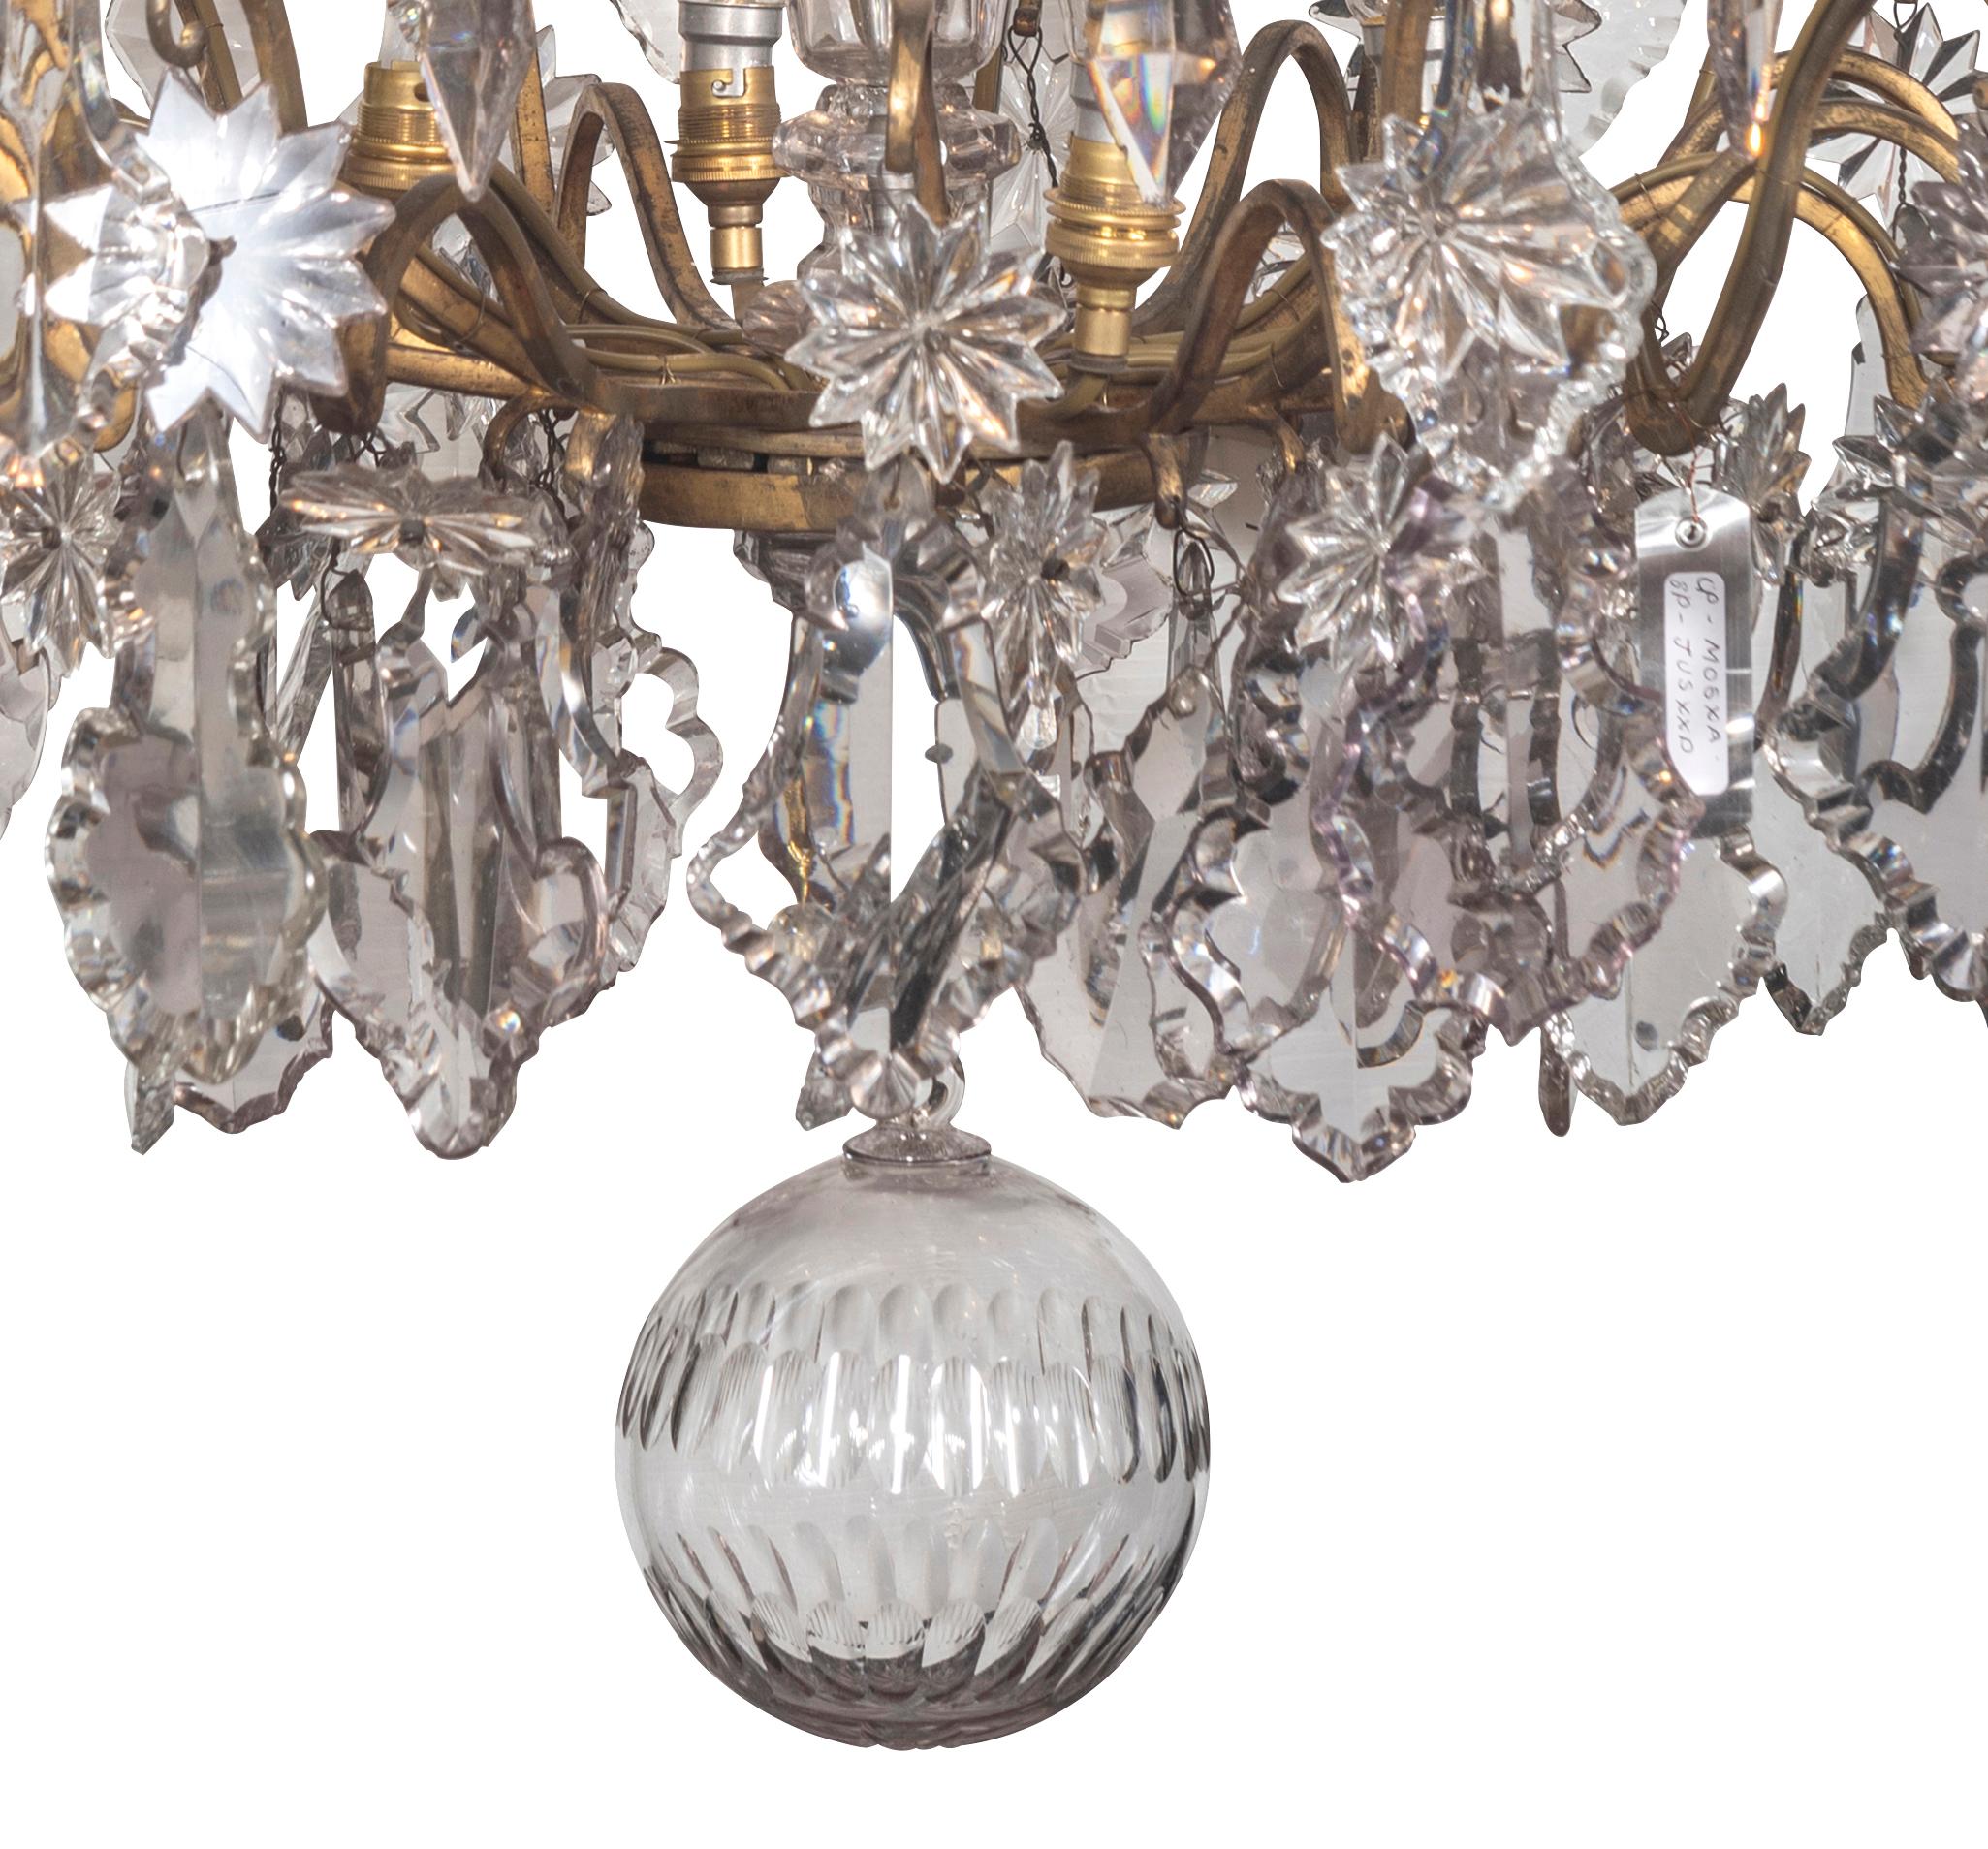 The corona issuing rising tendrils with pear drops and rosettes, the central crystal graduated baluster stem with conjoined scroll arms, the upper tier with further pear and rosette shaped drops continuing to the lower tier with 32 rising scroll